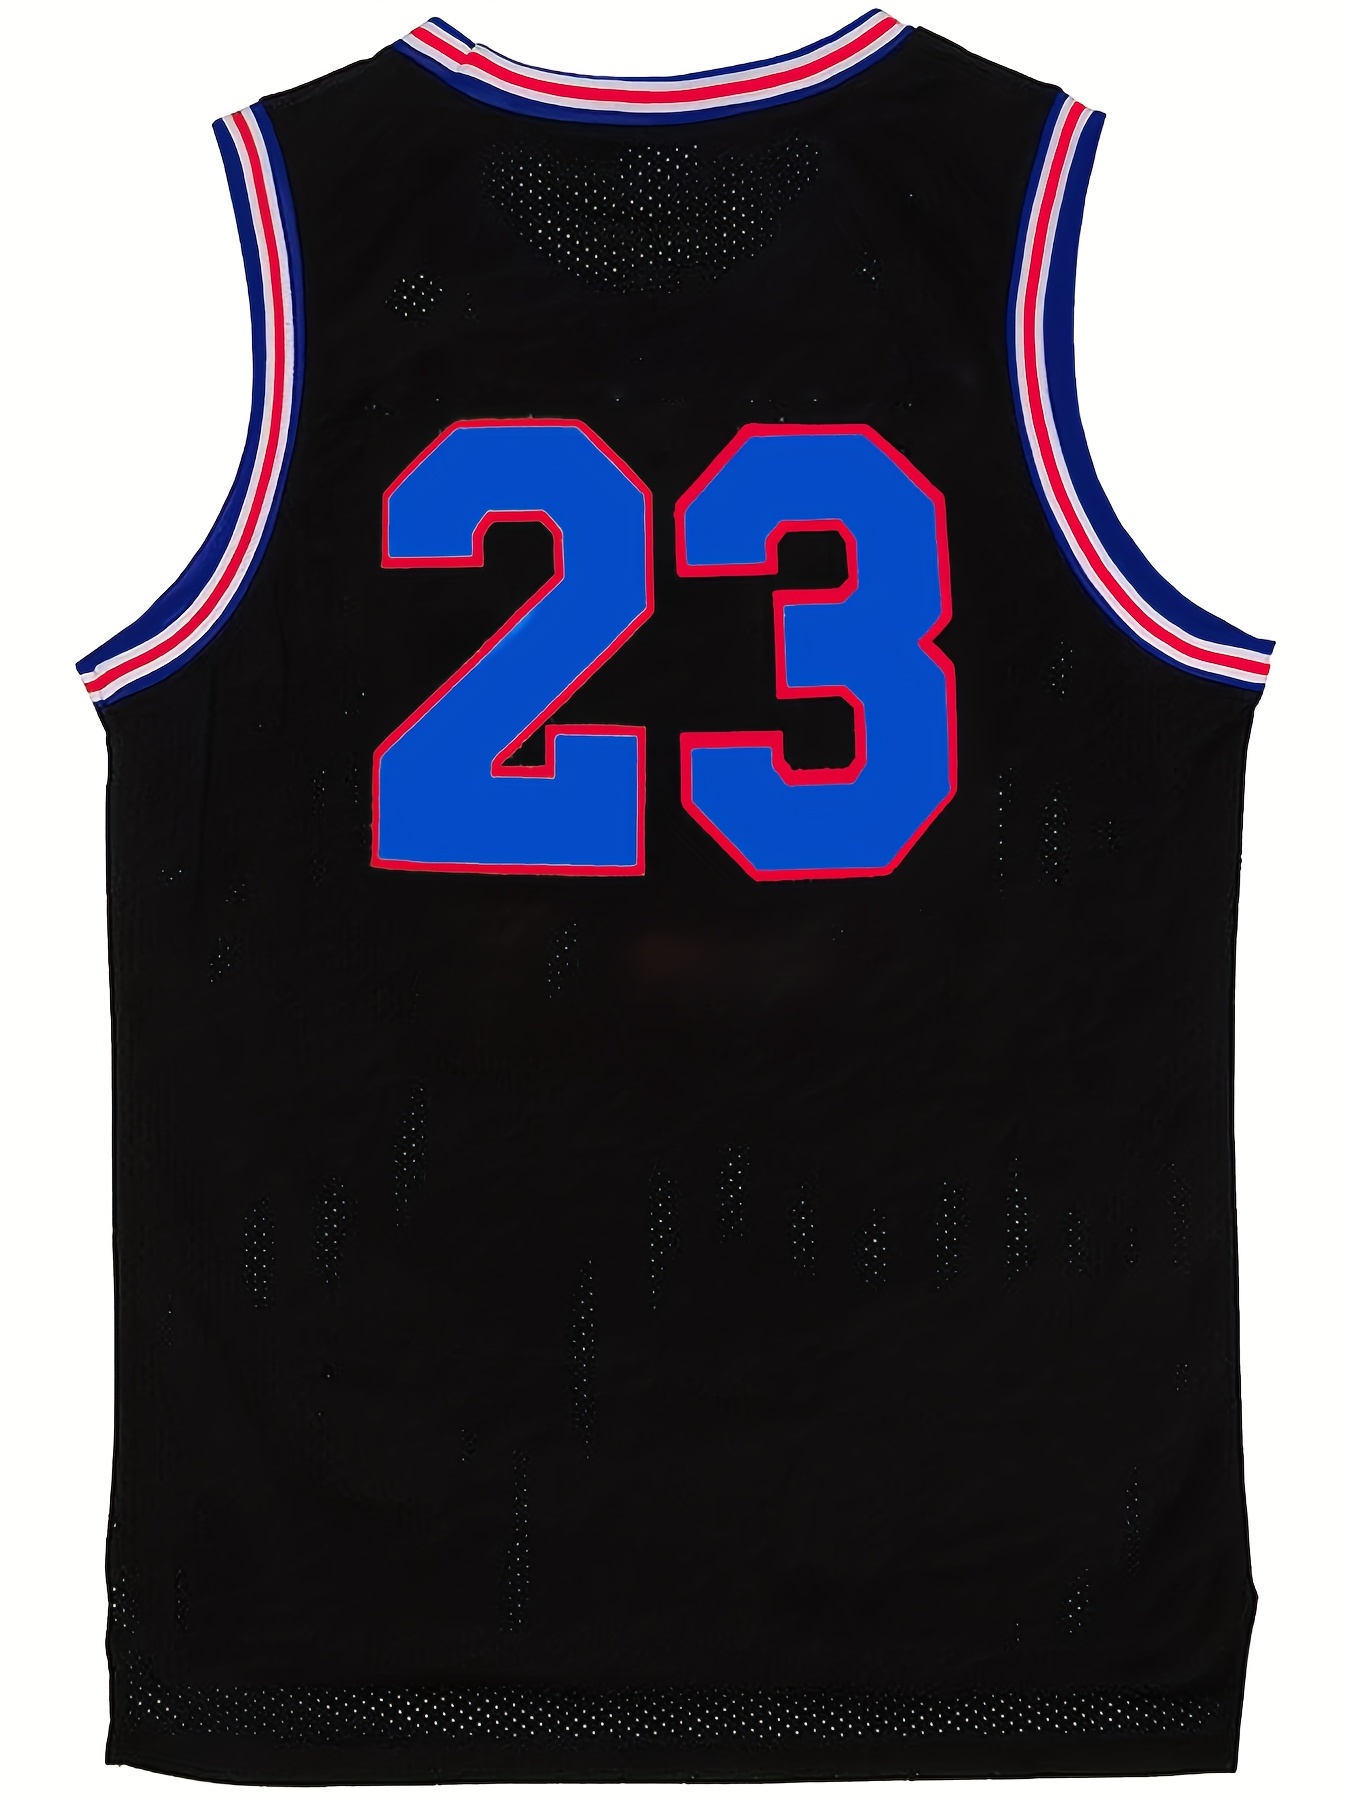  Men's No. 23 Basketball Jersey Classic Party Space Movie Jordan  Bug Jersey Unisex 90s Hip Hop Clothing Red/Black Jersey. : Sports 